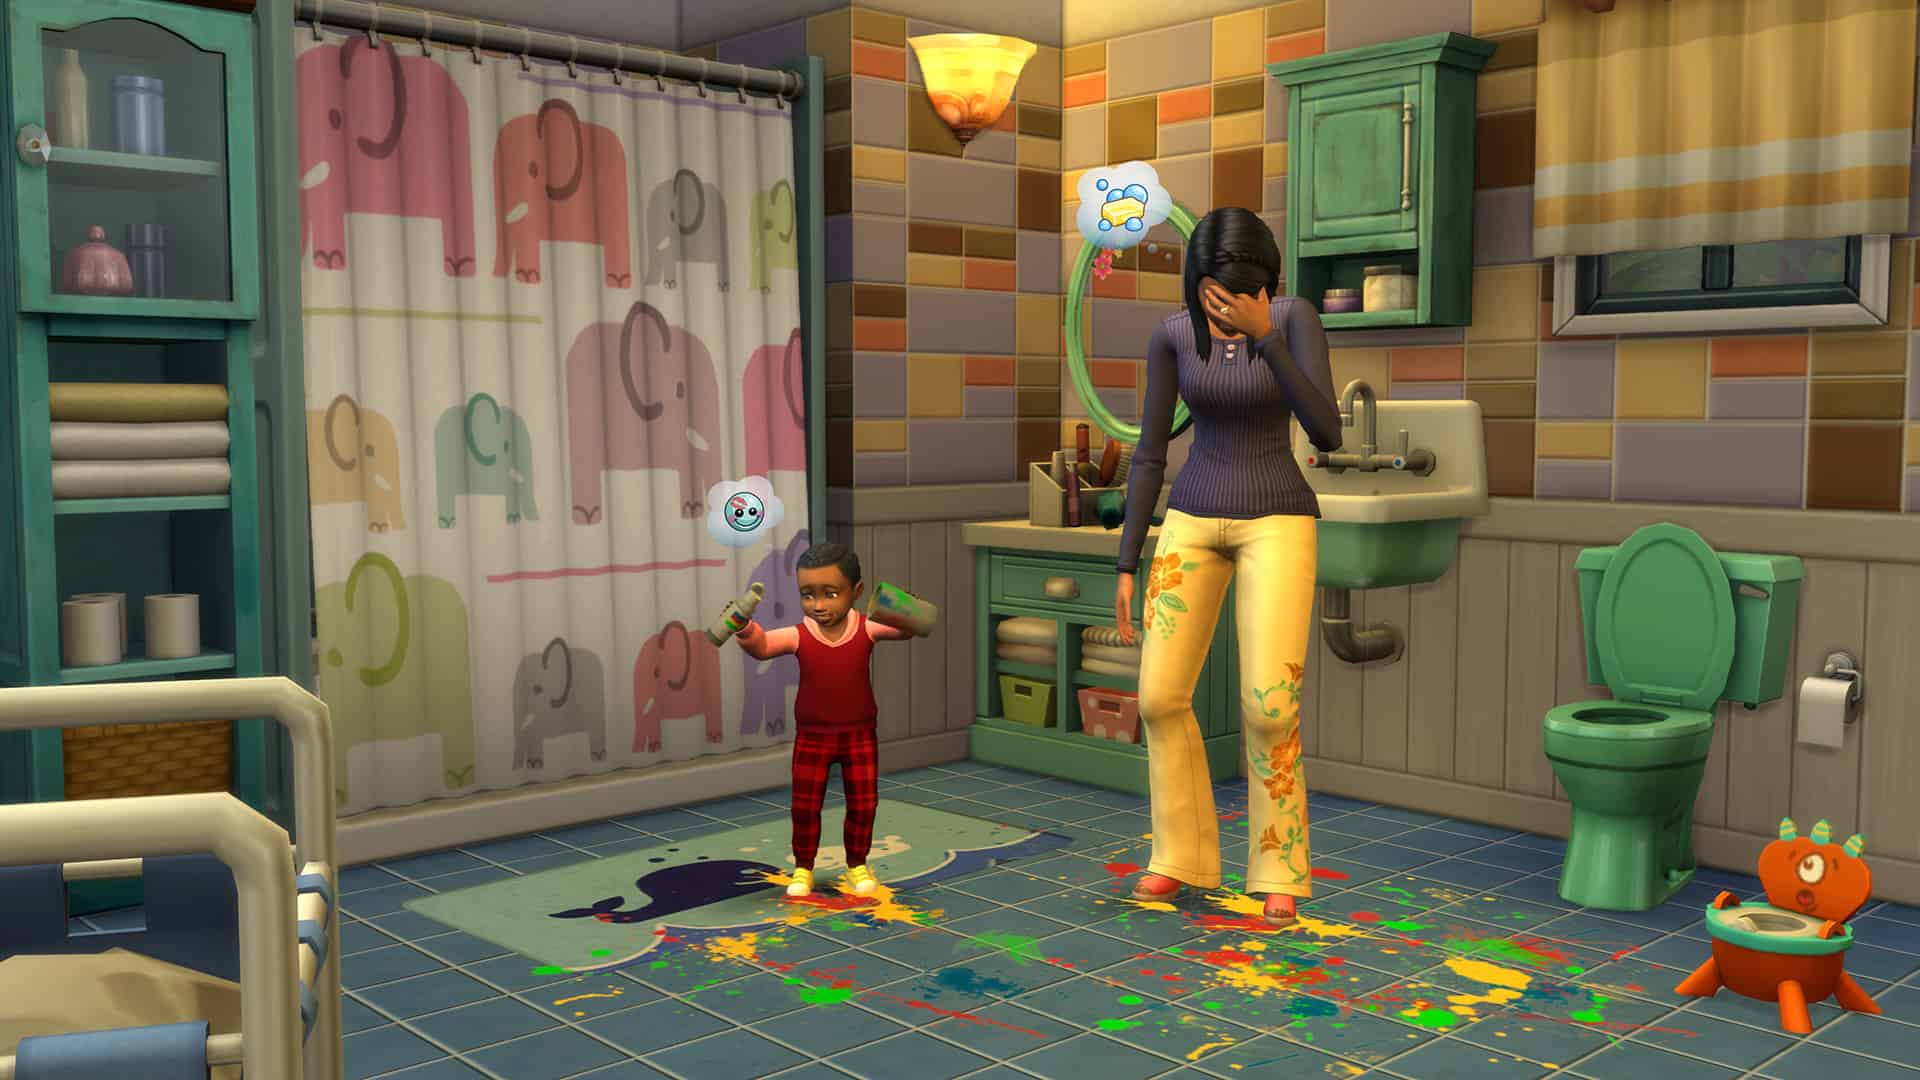 The Sims 4: Toddler Stuff Cheats & Cheat Codes for PC, PlayStation